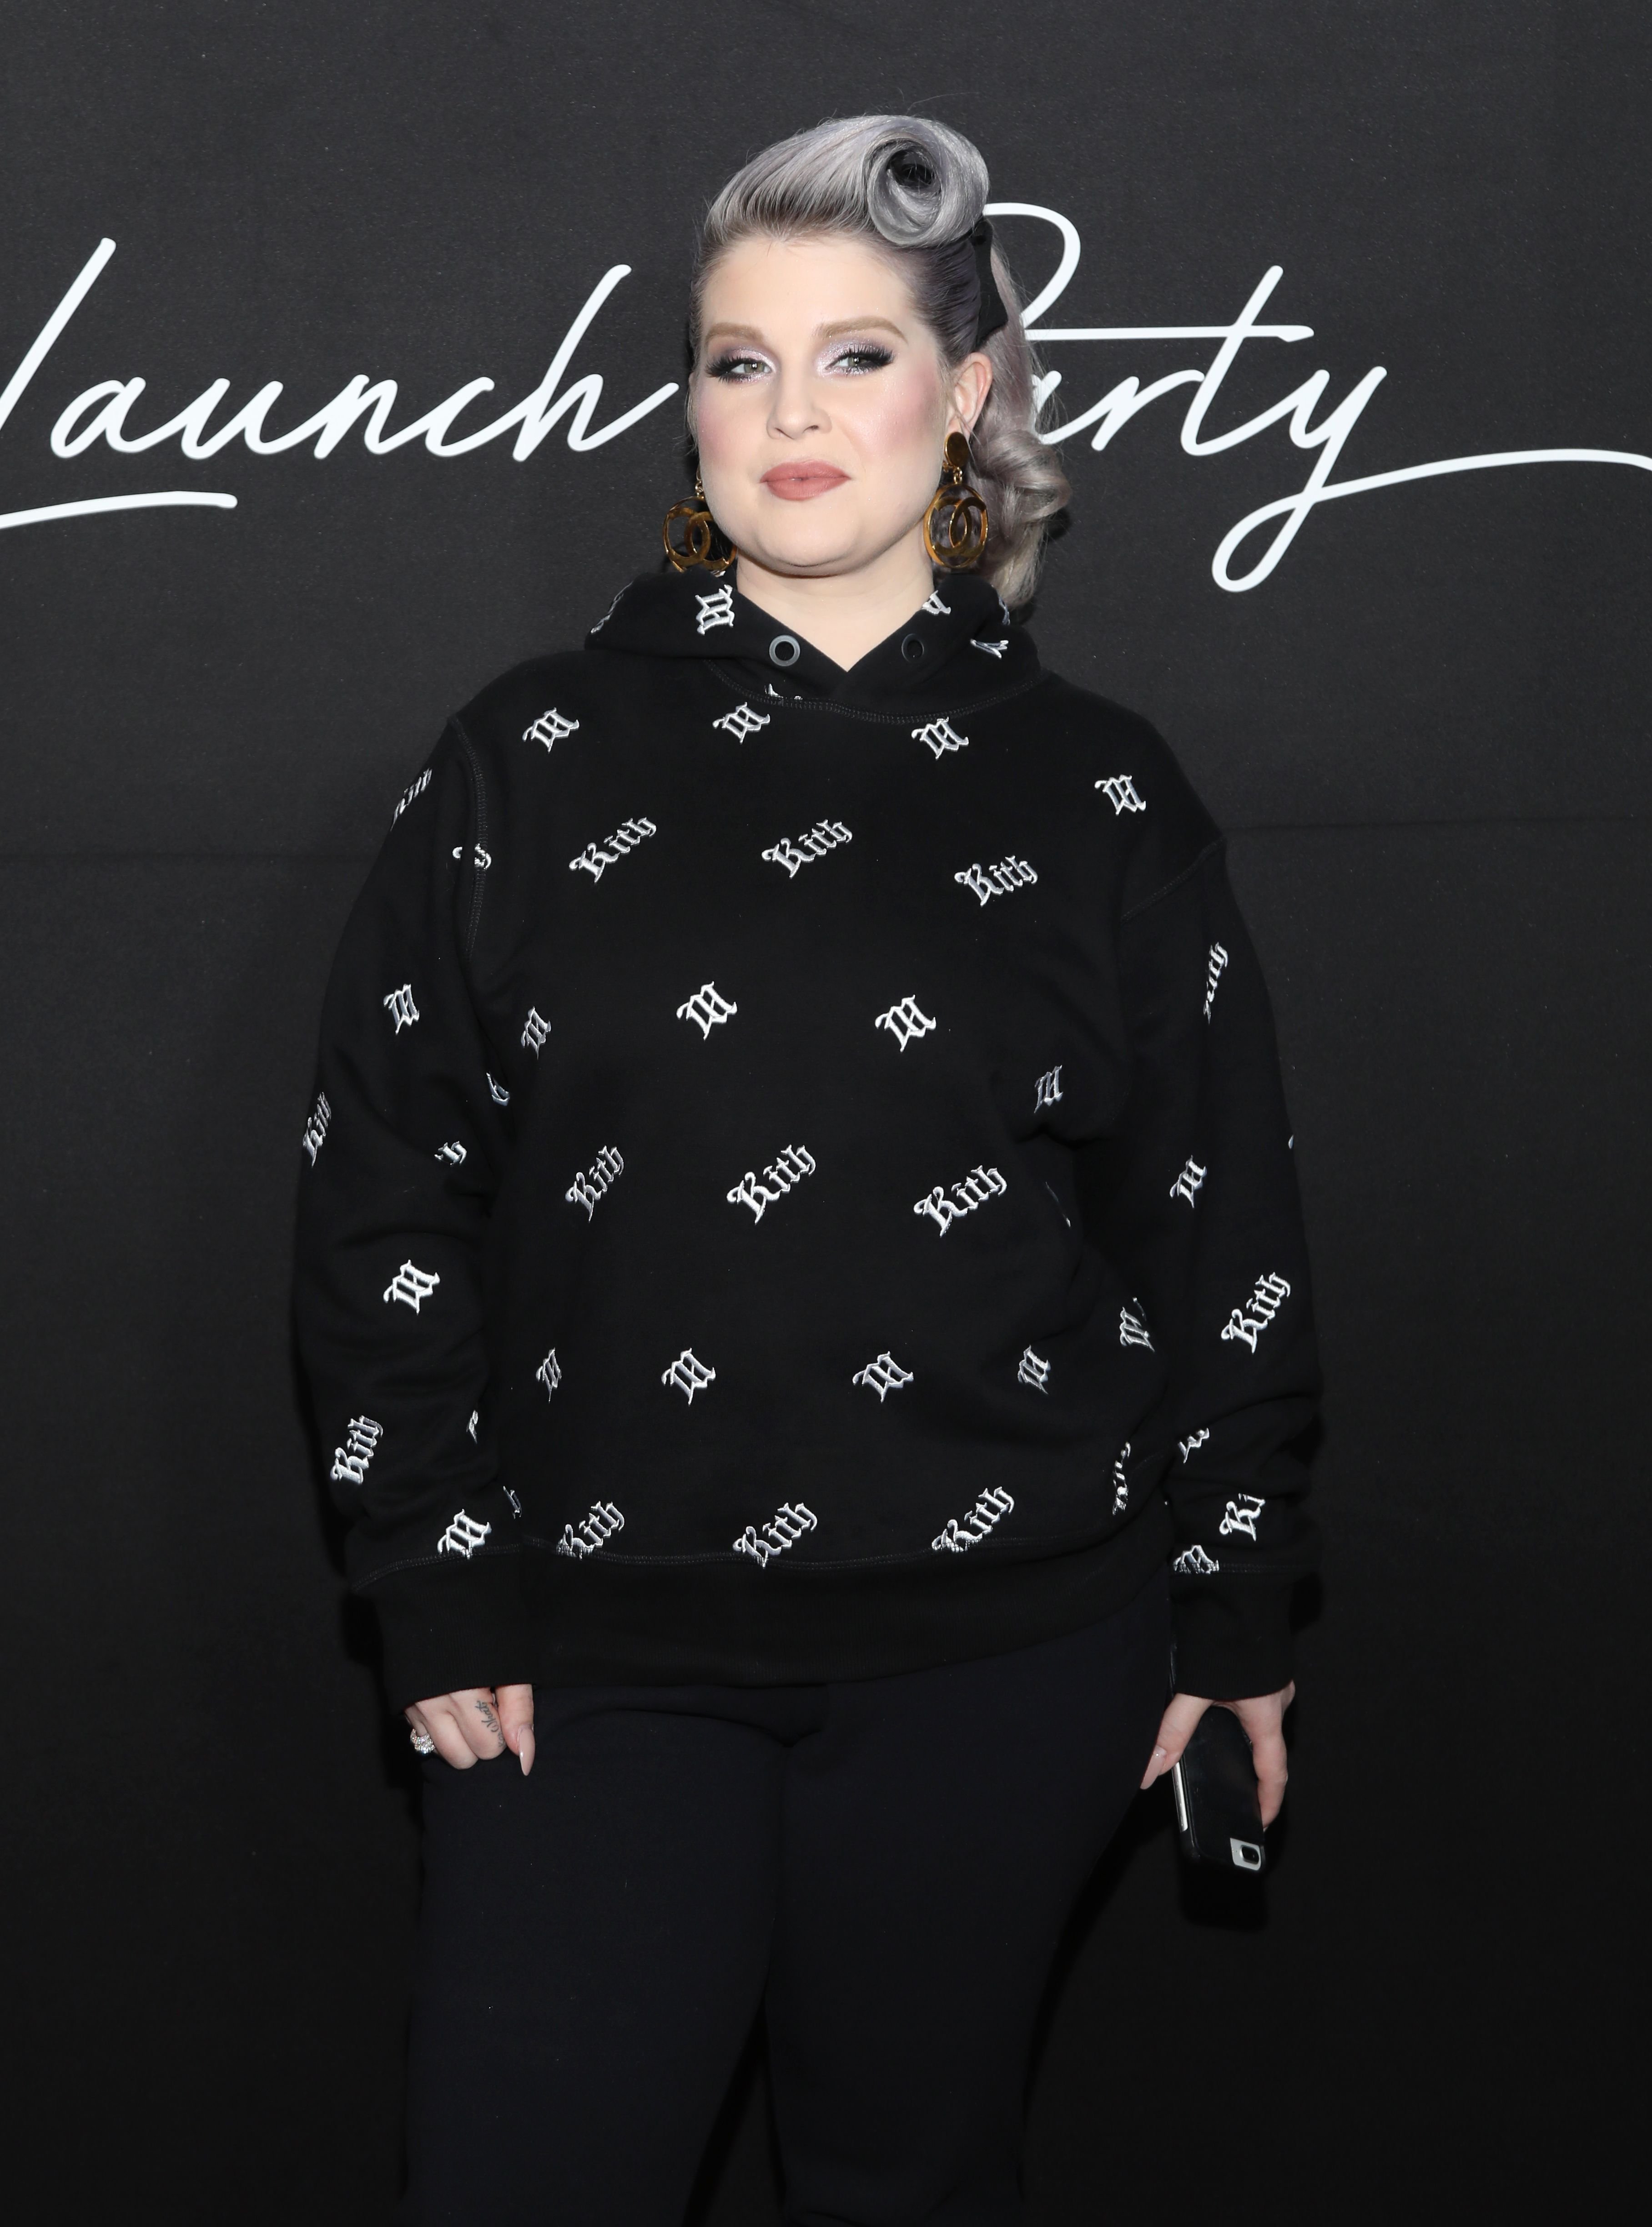 Kelly Osbourne at the Wheels Los Angeles launch at Sunset Tower on March 14, 2019, in California | Photo: Jerritt Clark/Getty Images